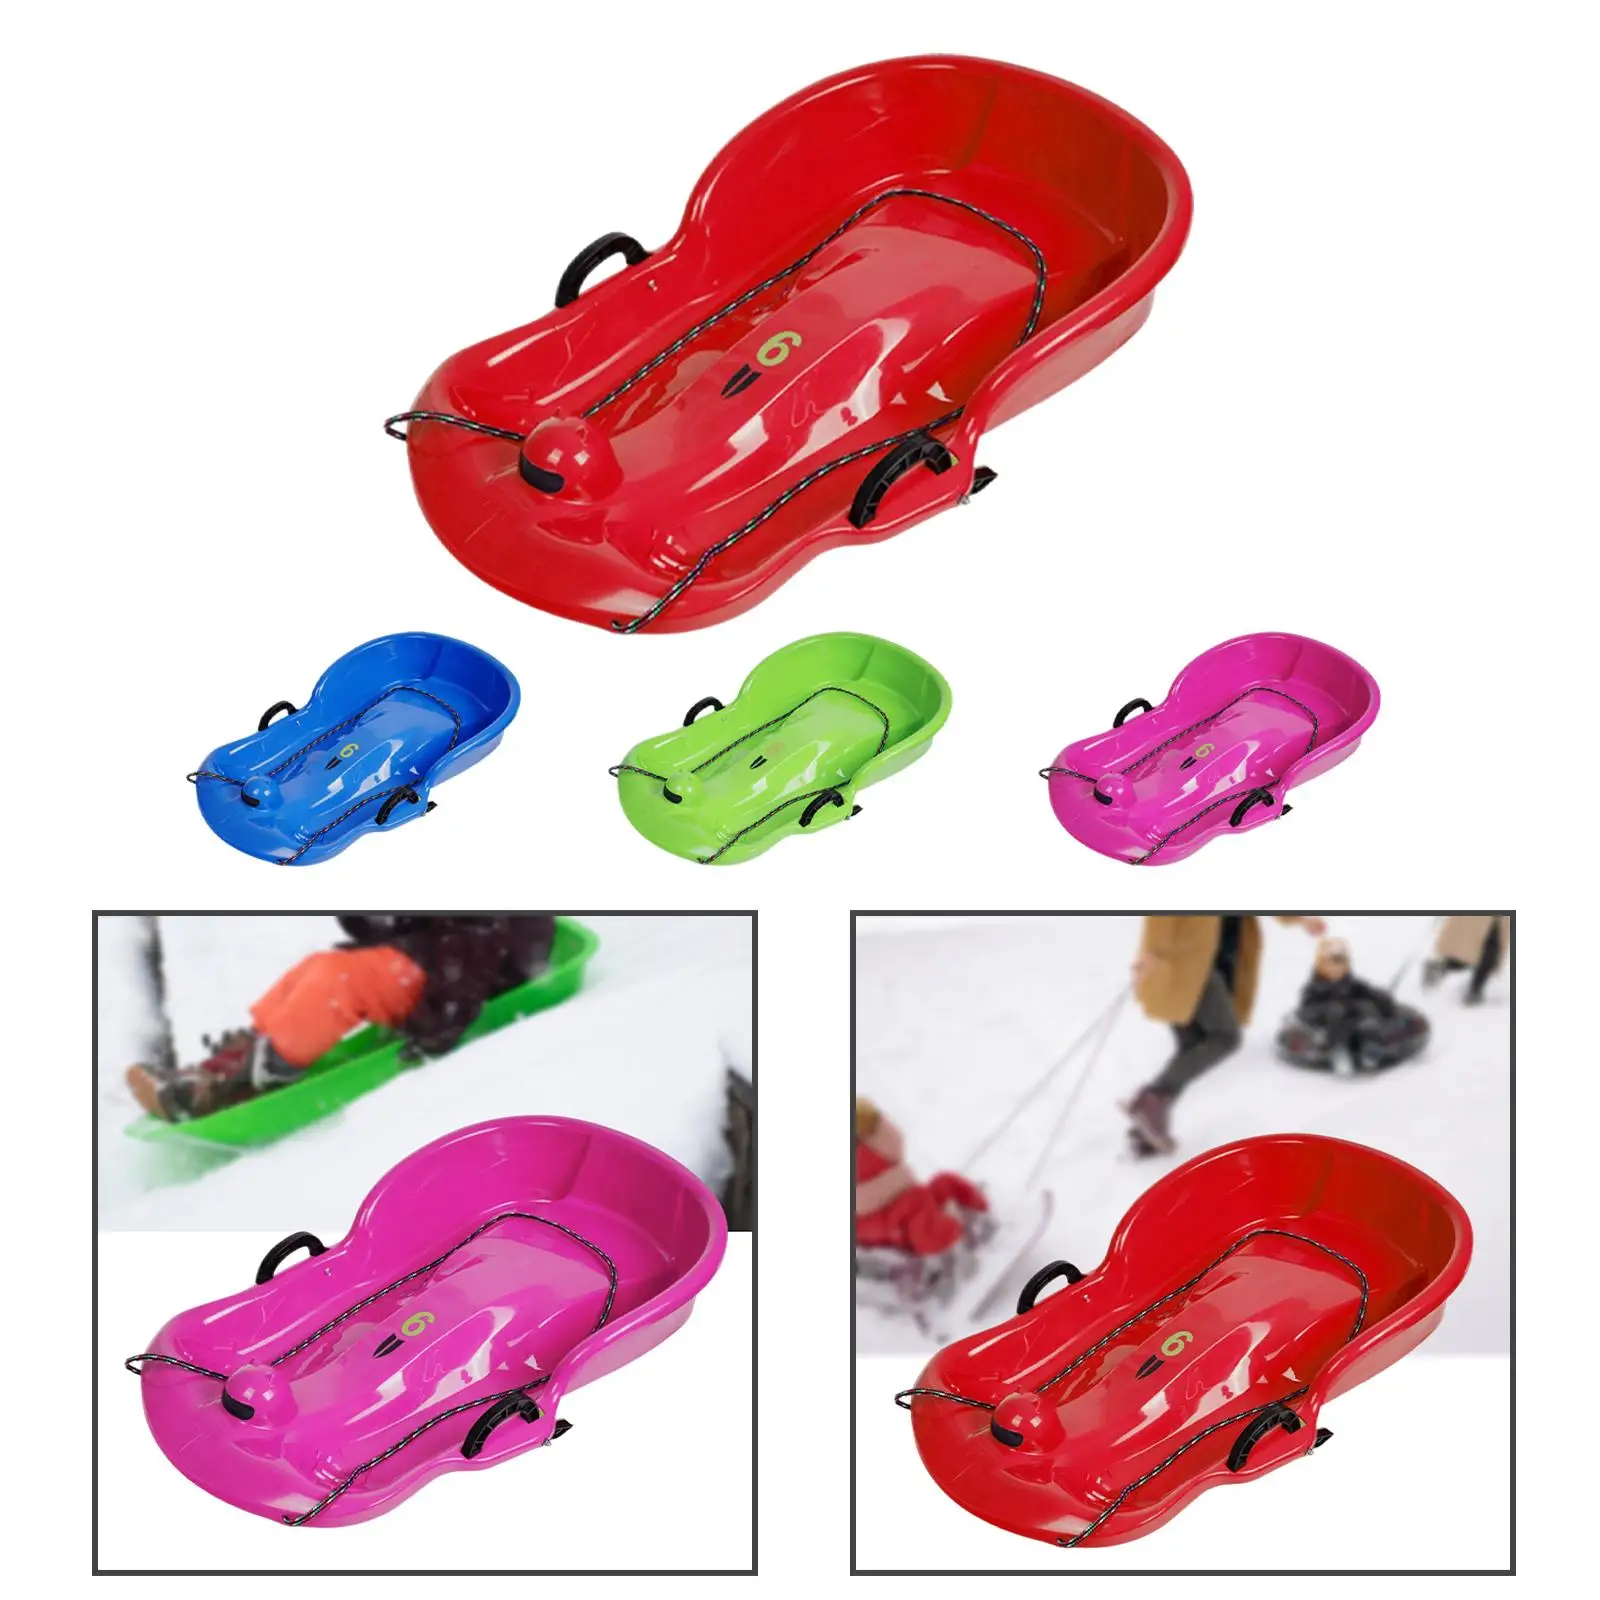 Winter snow sled with brake handle, kids sled with double seat for sports,